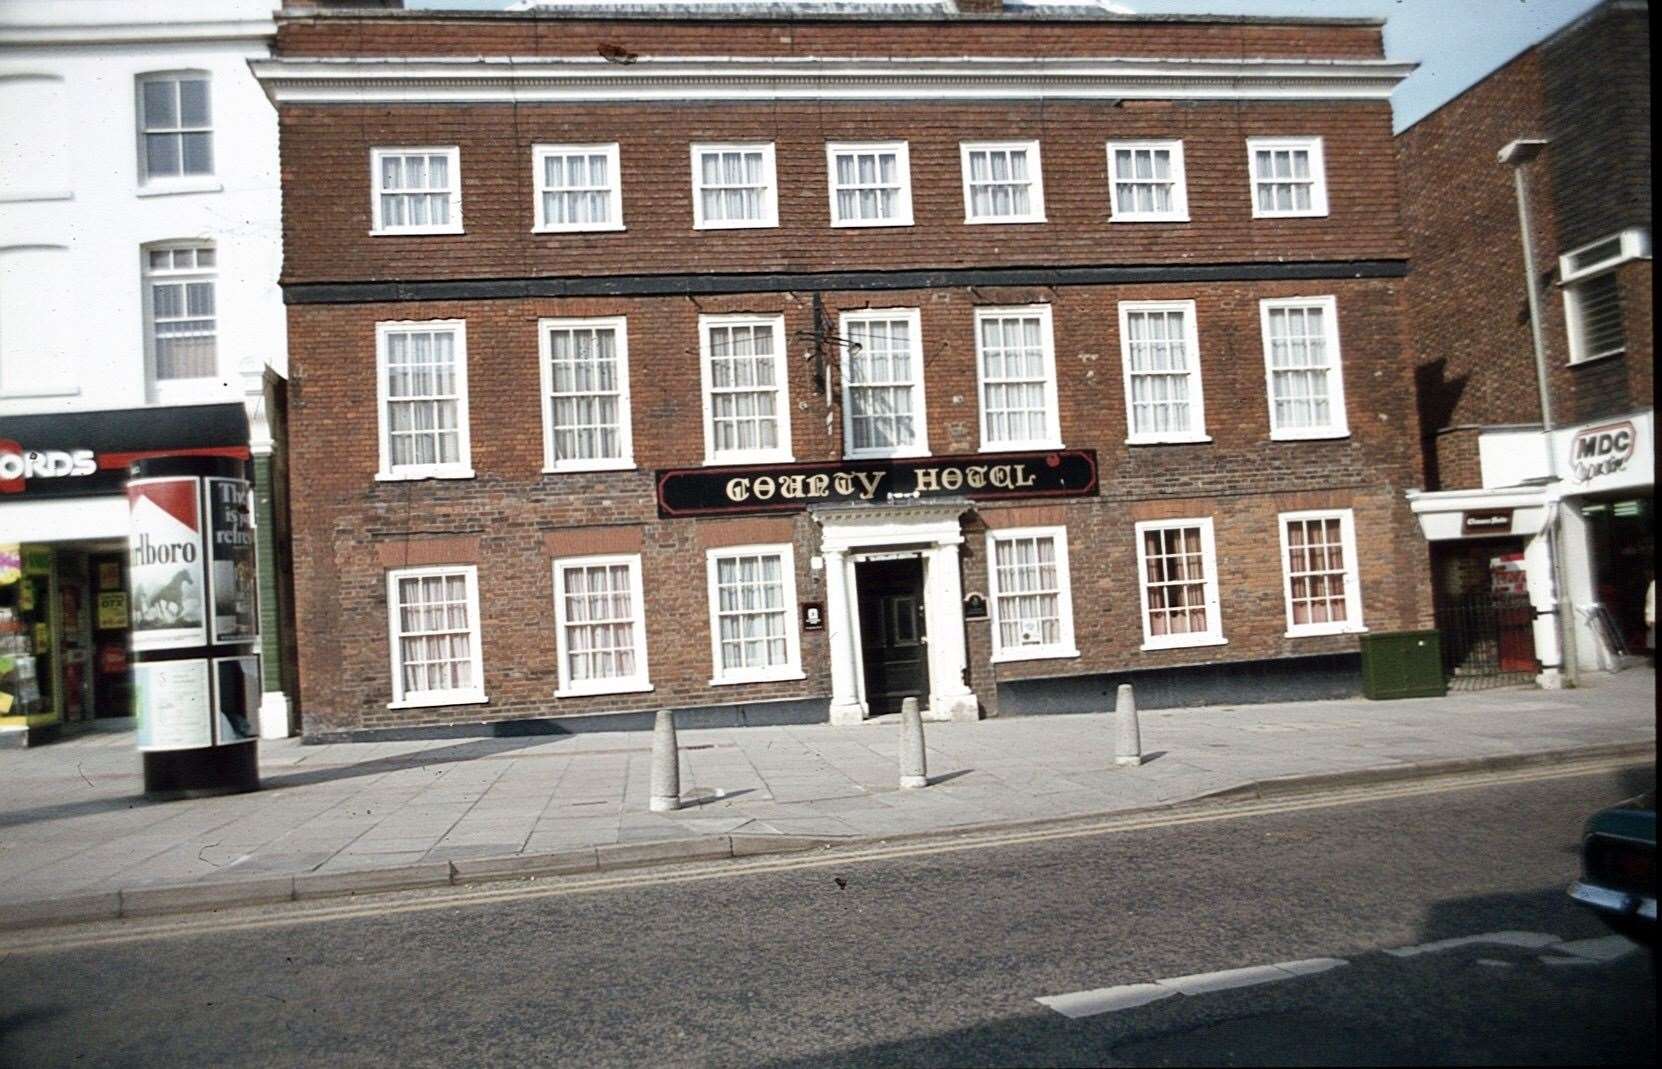 The pub pictured in 1980